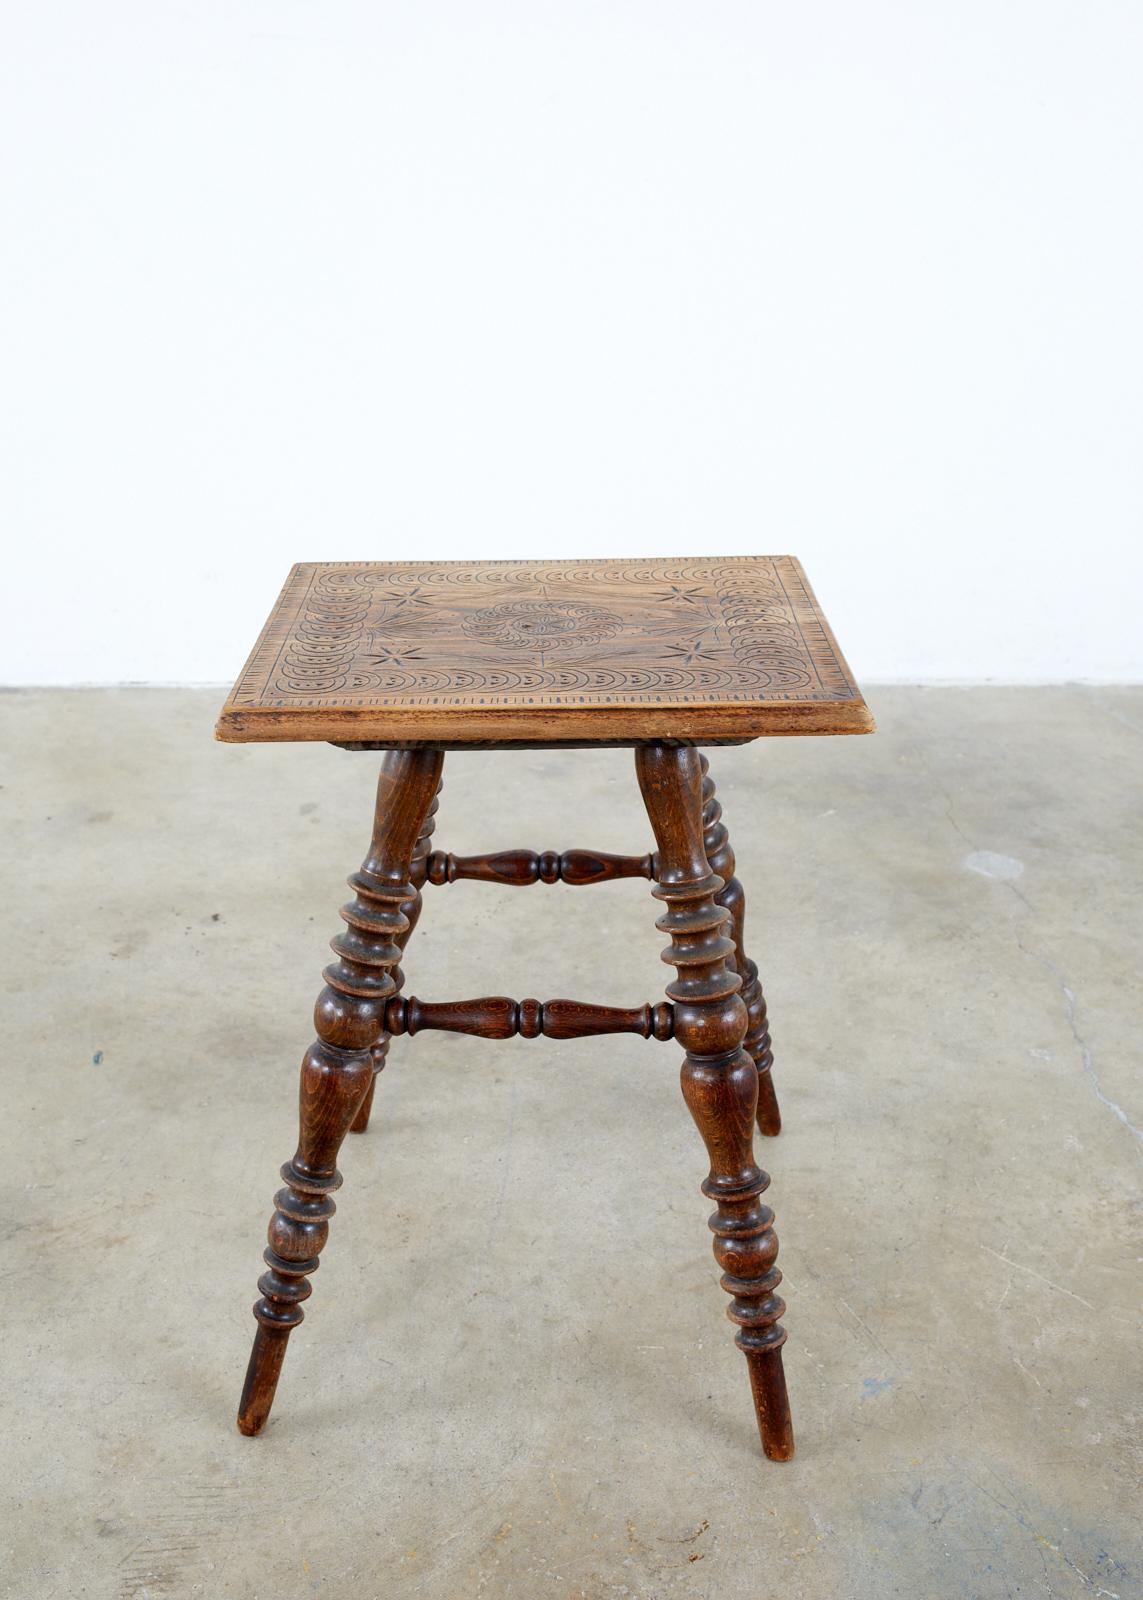 Hand-Crafted Rustic American Wooden Stool or Drinks Table